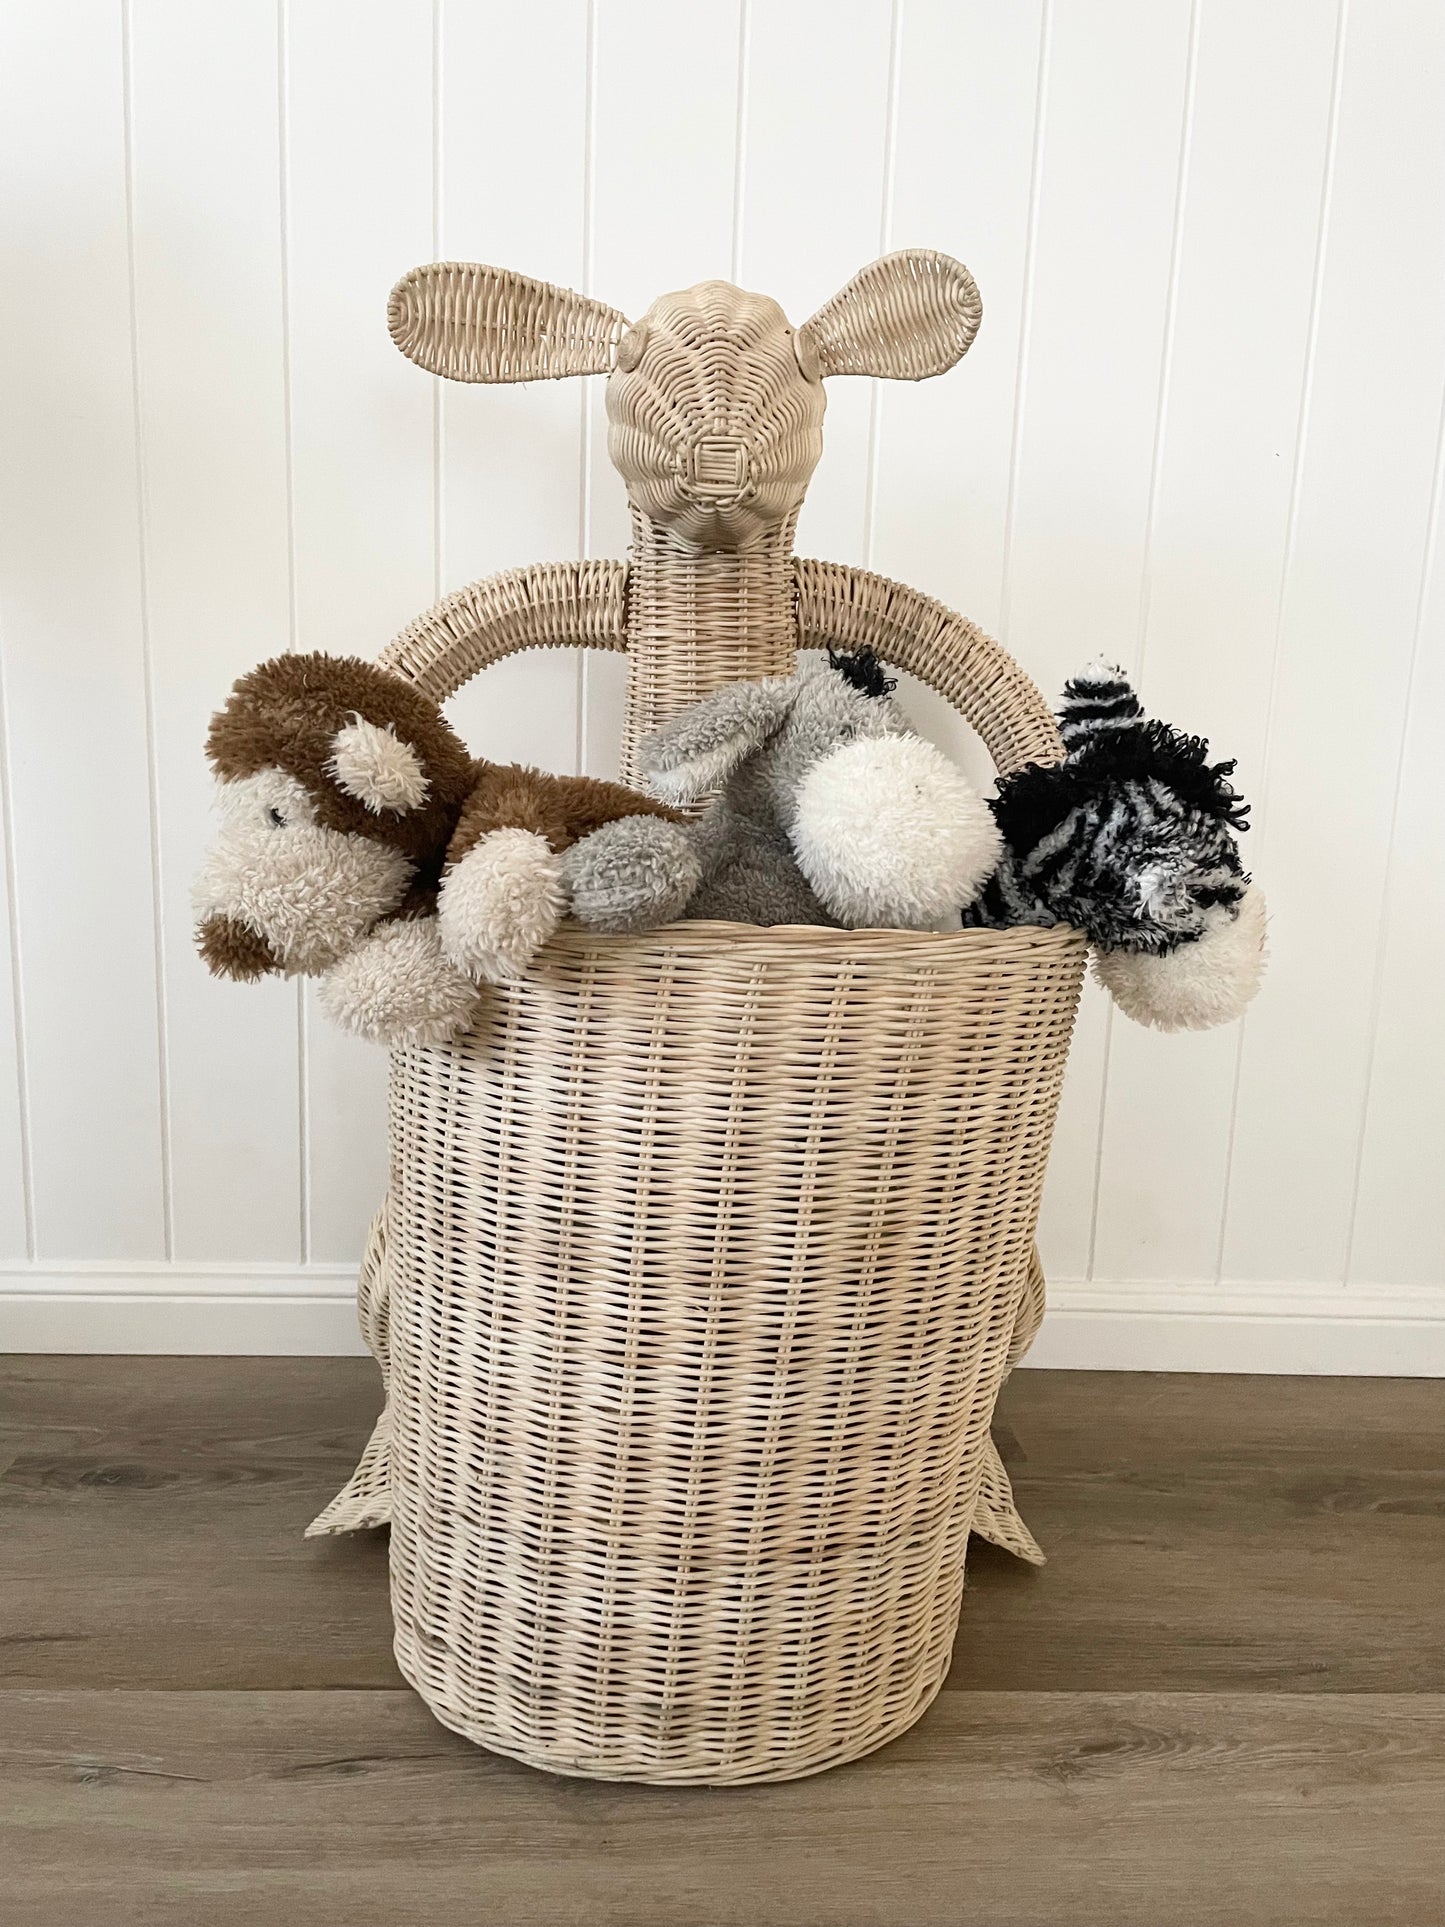 Roo Toy Basket